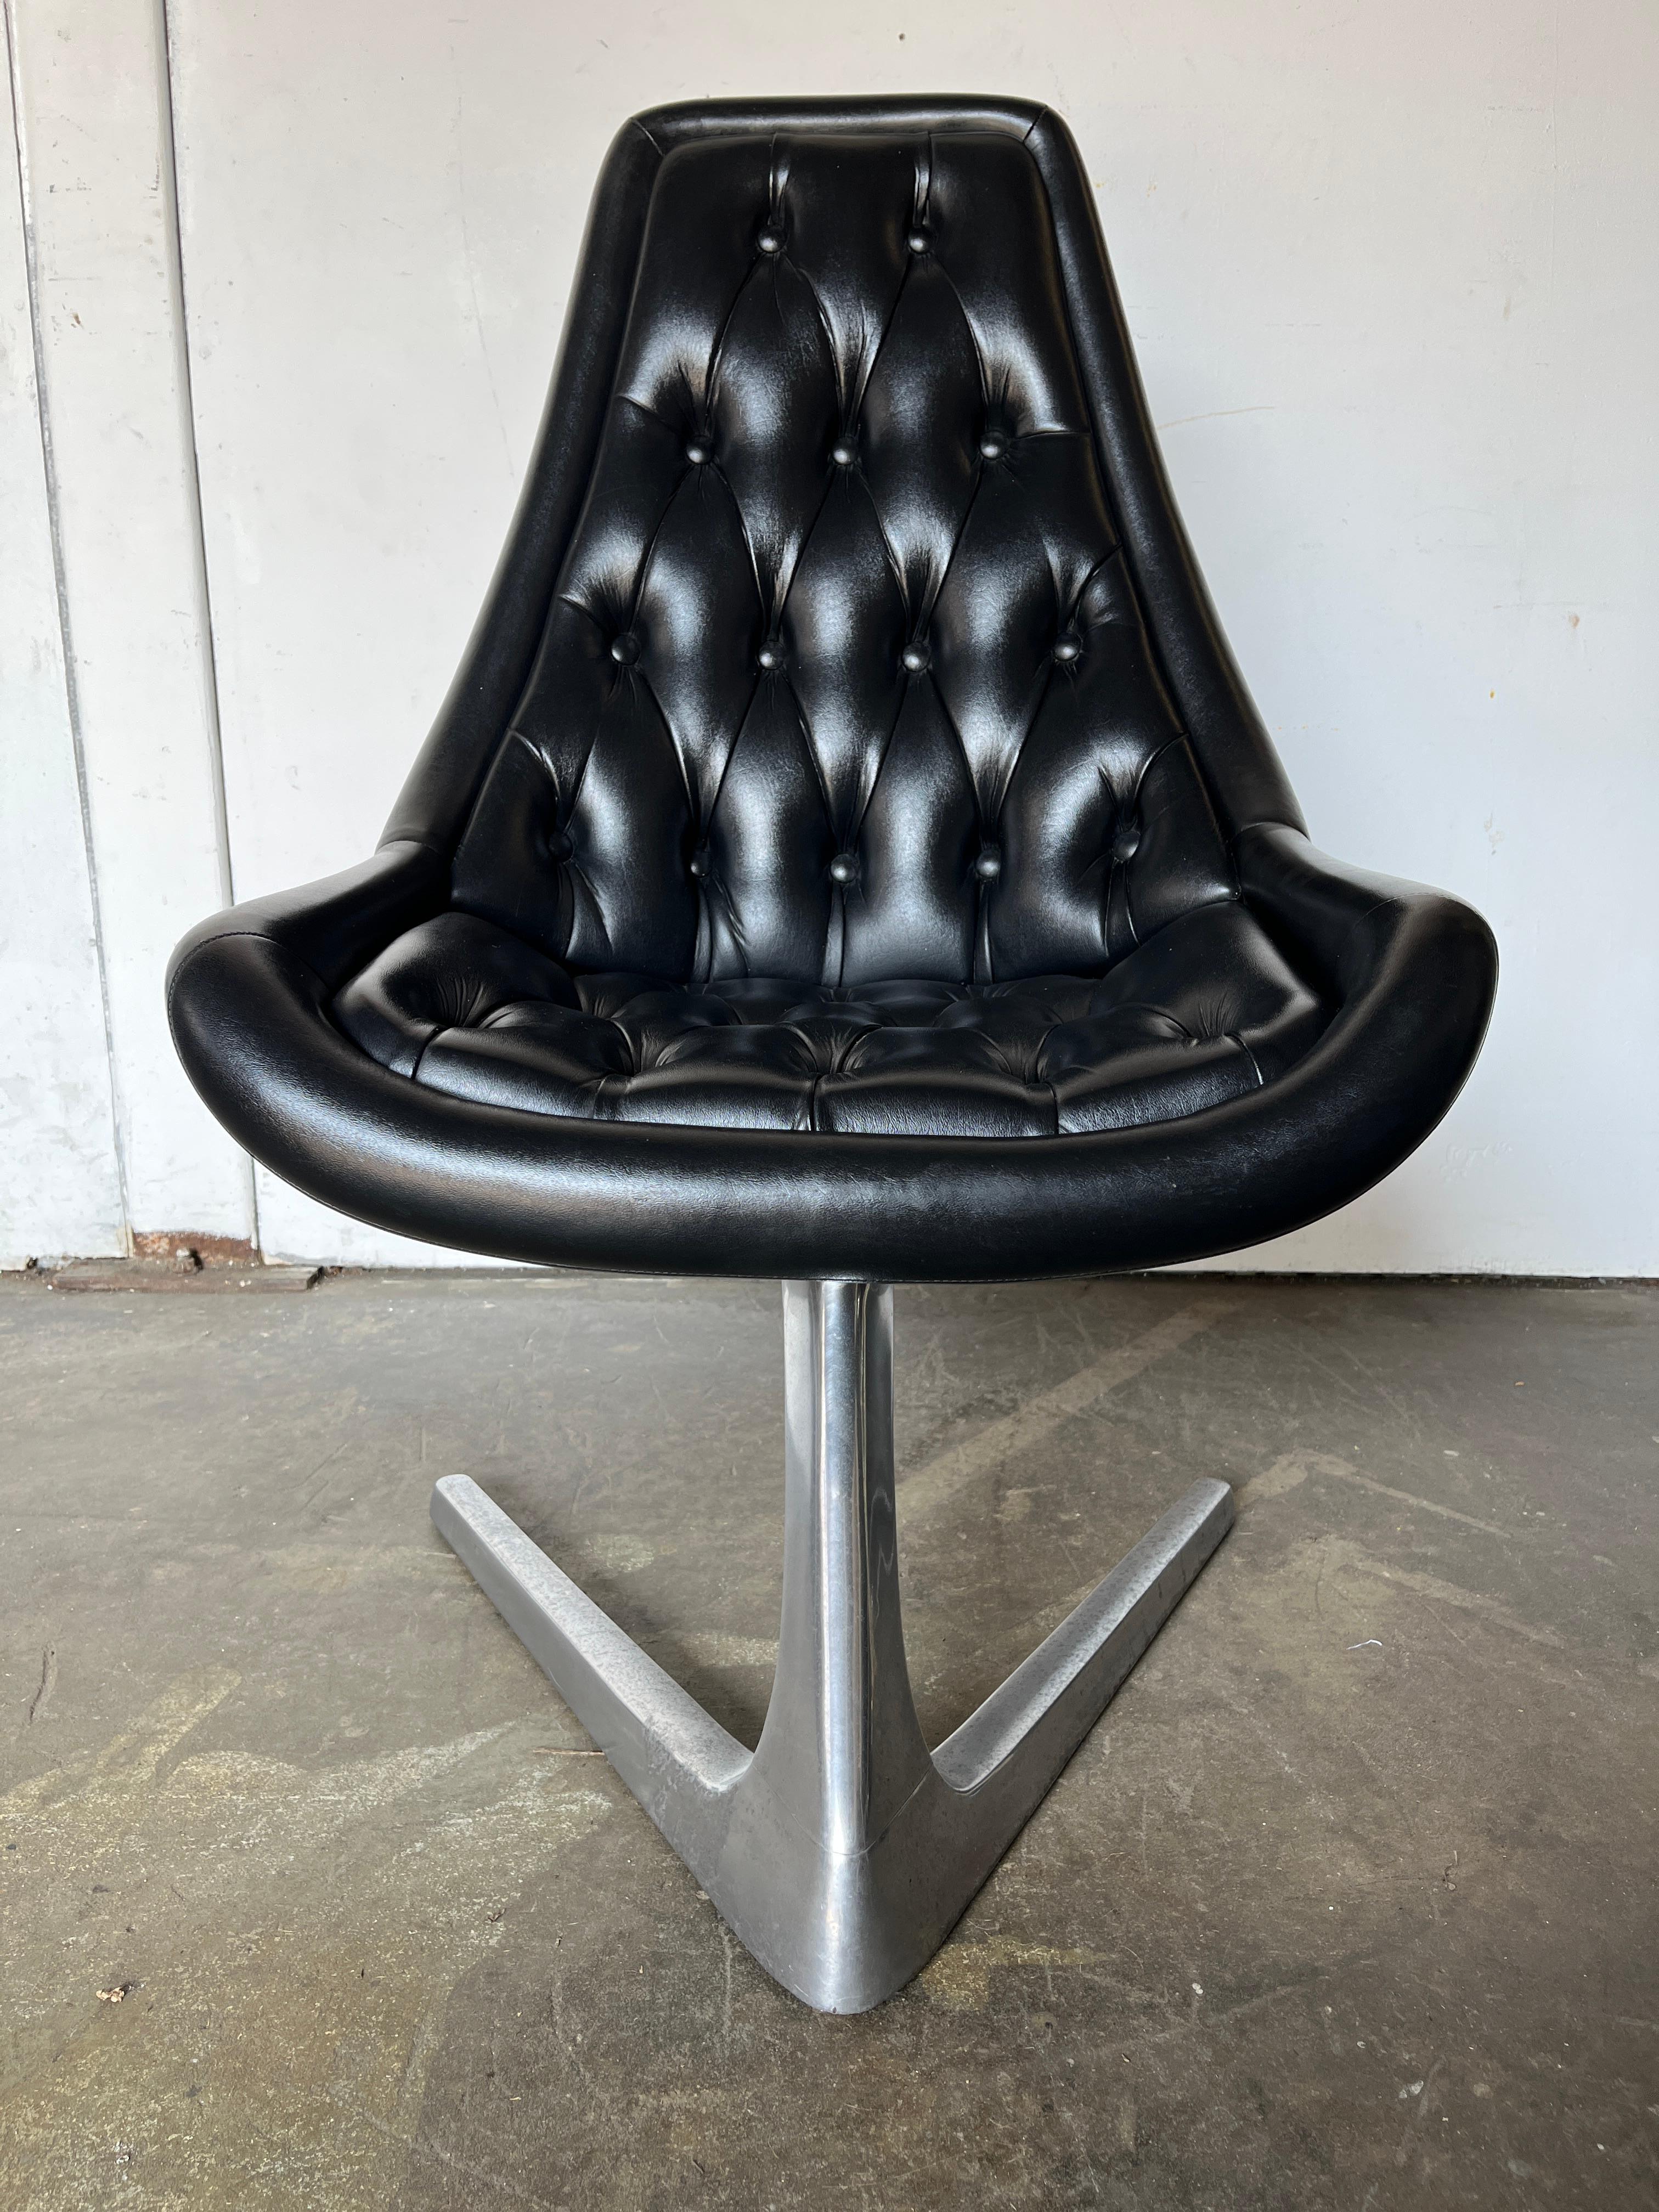 20th Century Midcentury 'Star Trek' Sculpta Swivel Chairs by Chromcraft (two available)